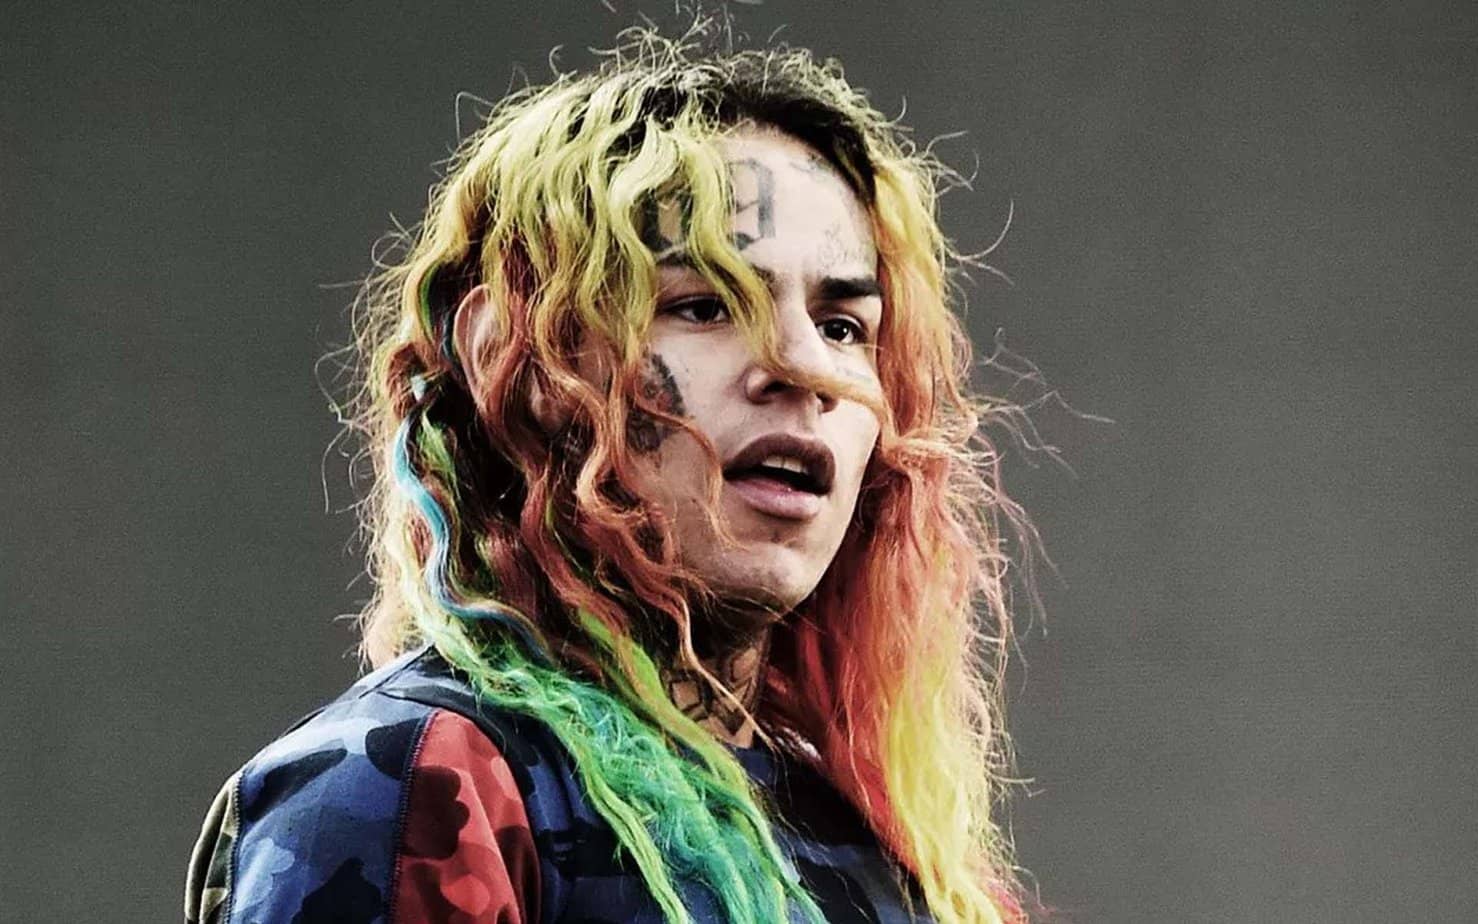 Tekashi 6ix9ine Out of Prison, Can Produce New Music